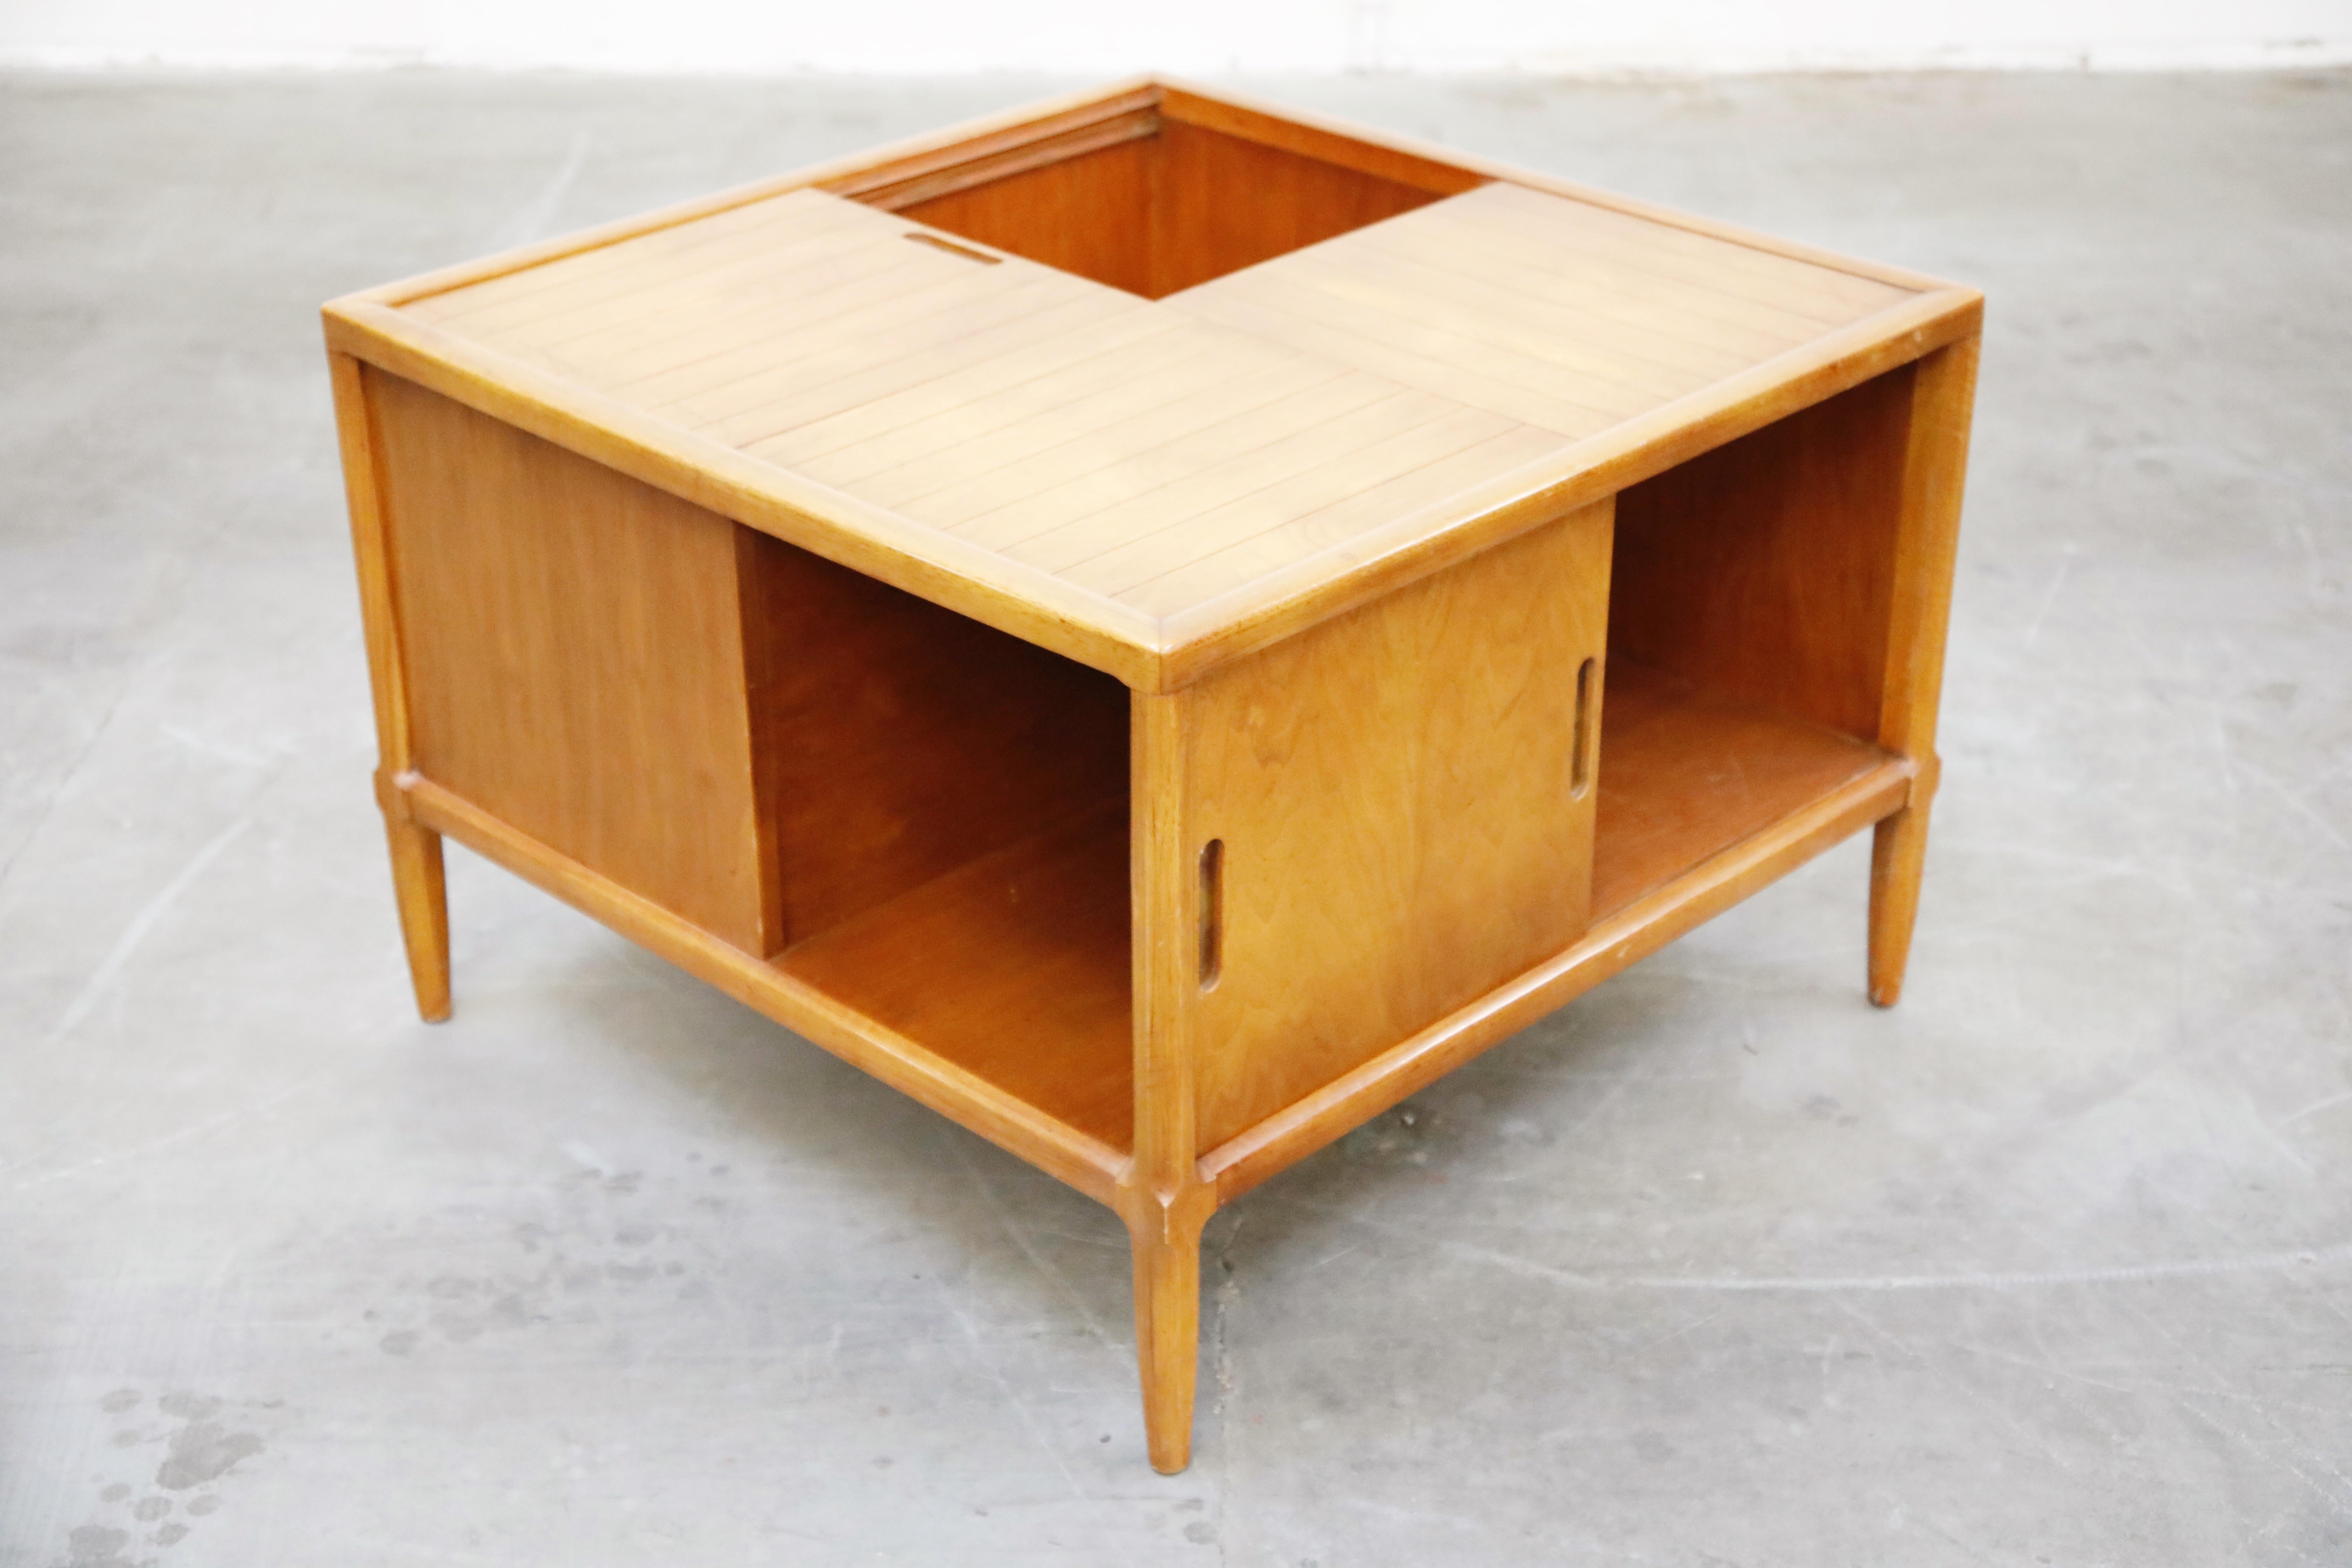 Mid-Century Modern Tomlinson Sophisticate Cocktail Bar and Storage Coffee Table, 1950s, Signed